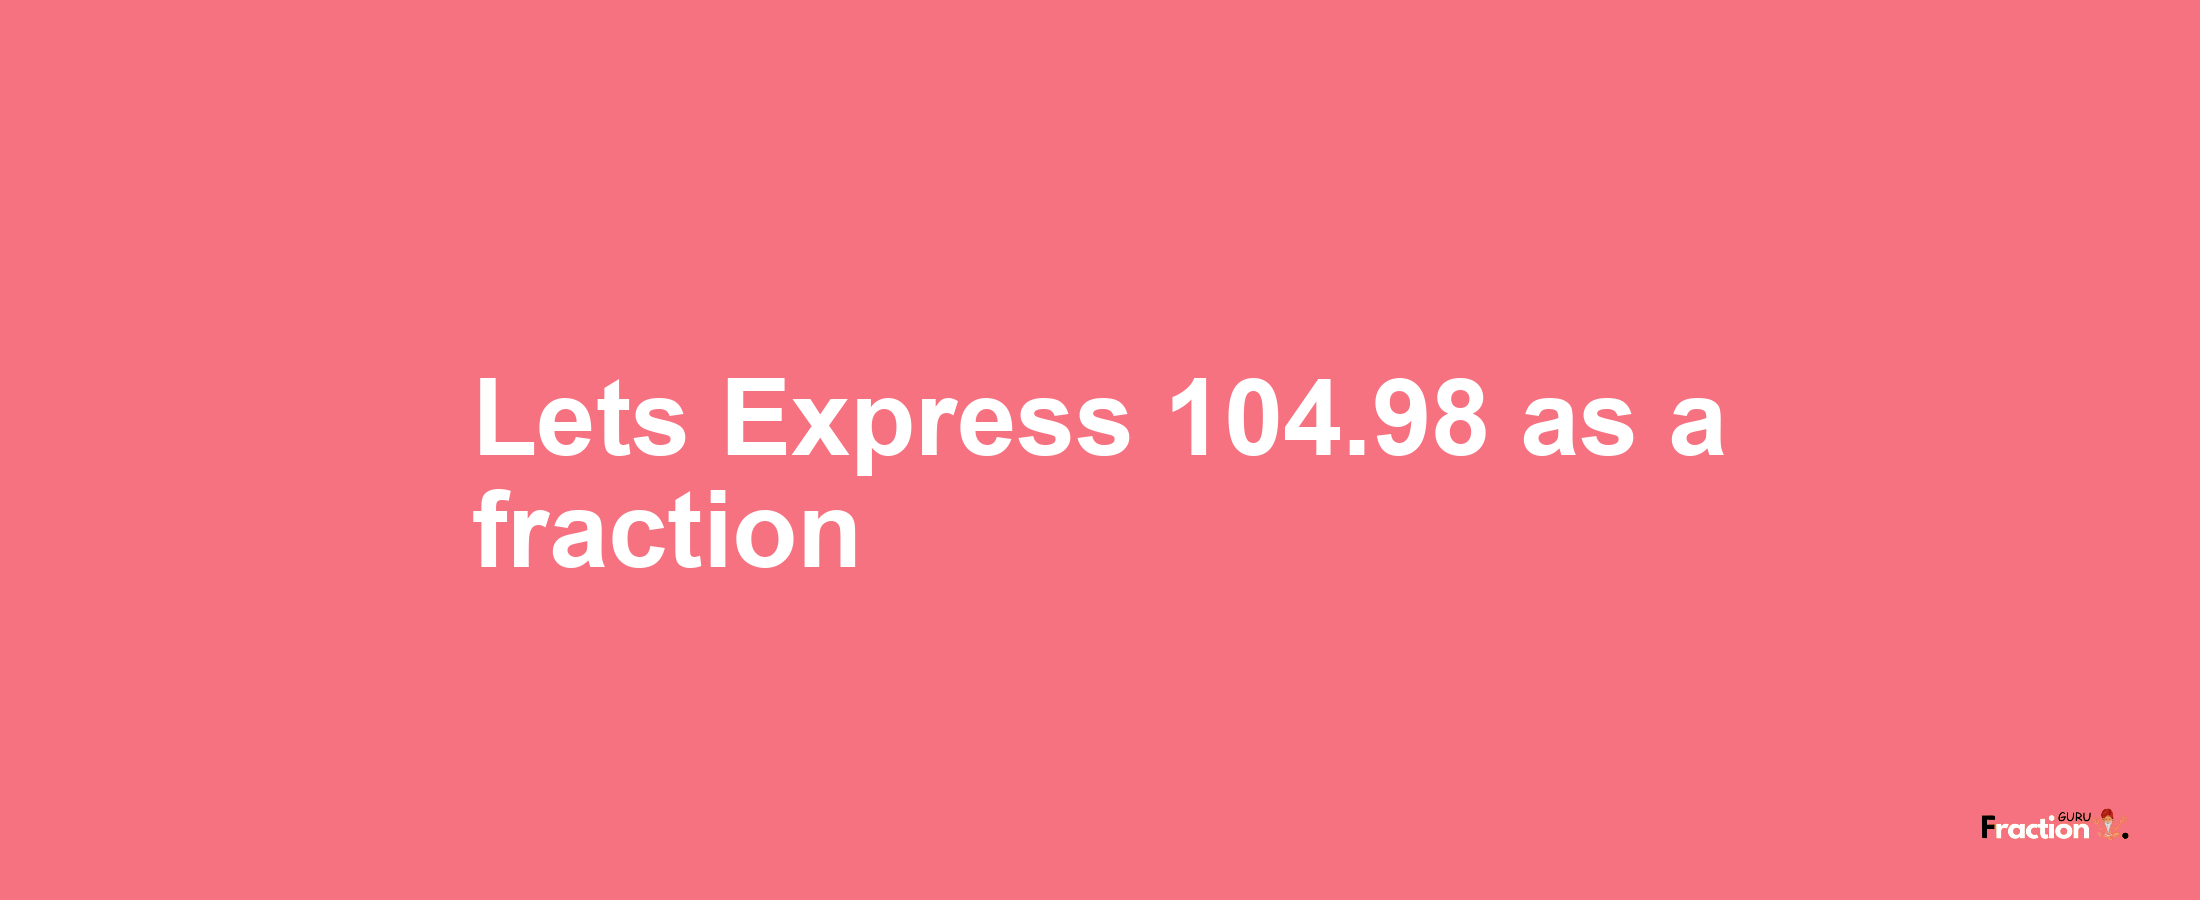 Lets Express 104.98 as afraction